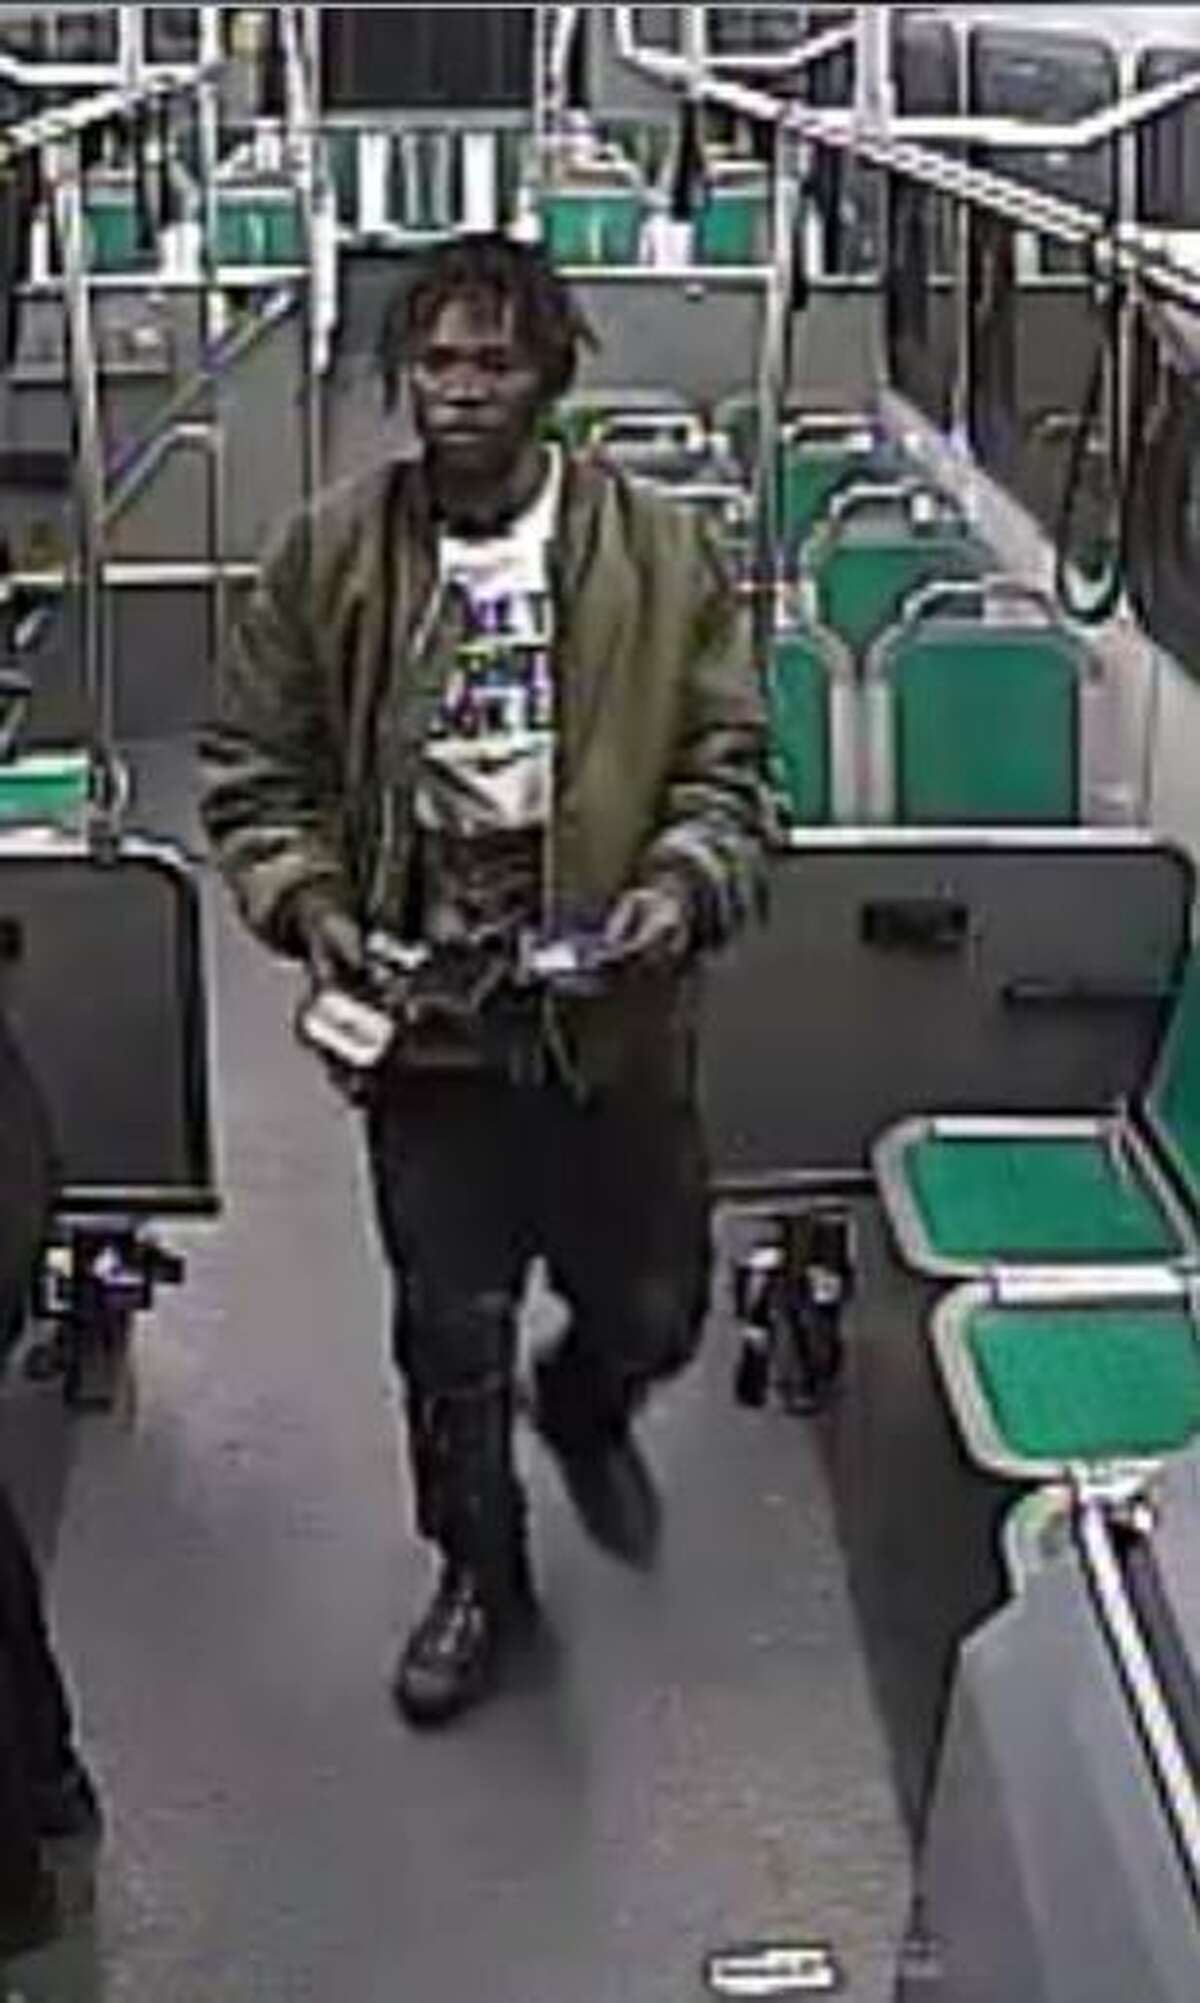 BART Police are asking for help identifying a man suspected of fatally punching a fellow passenger.